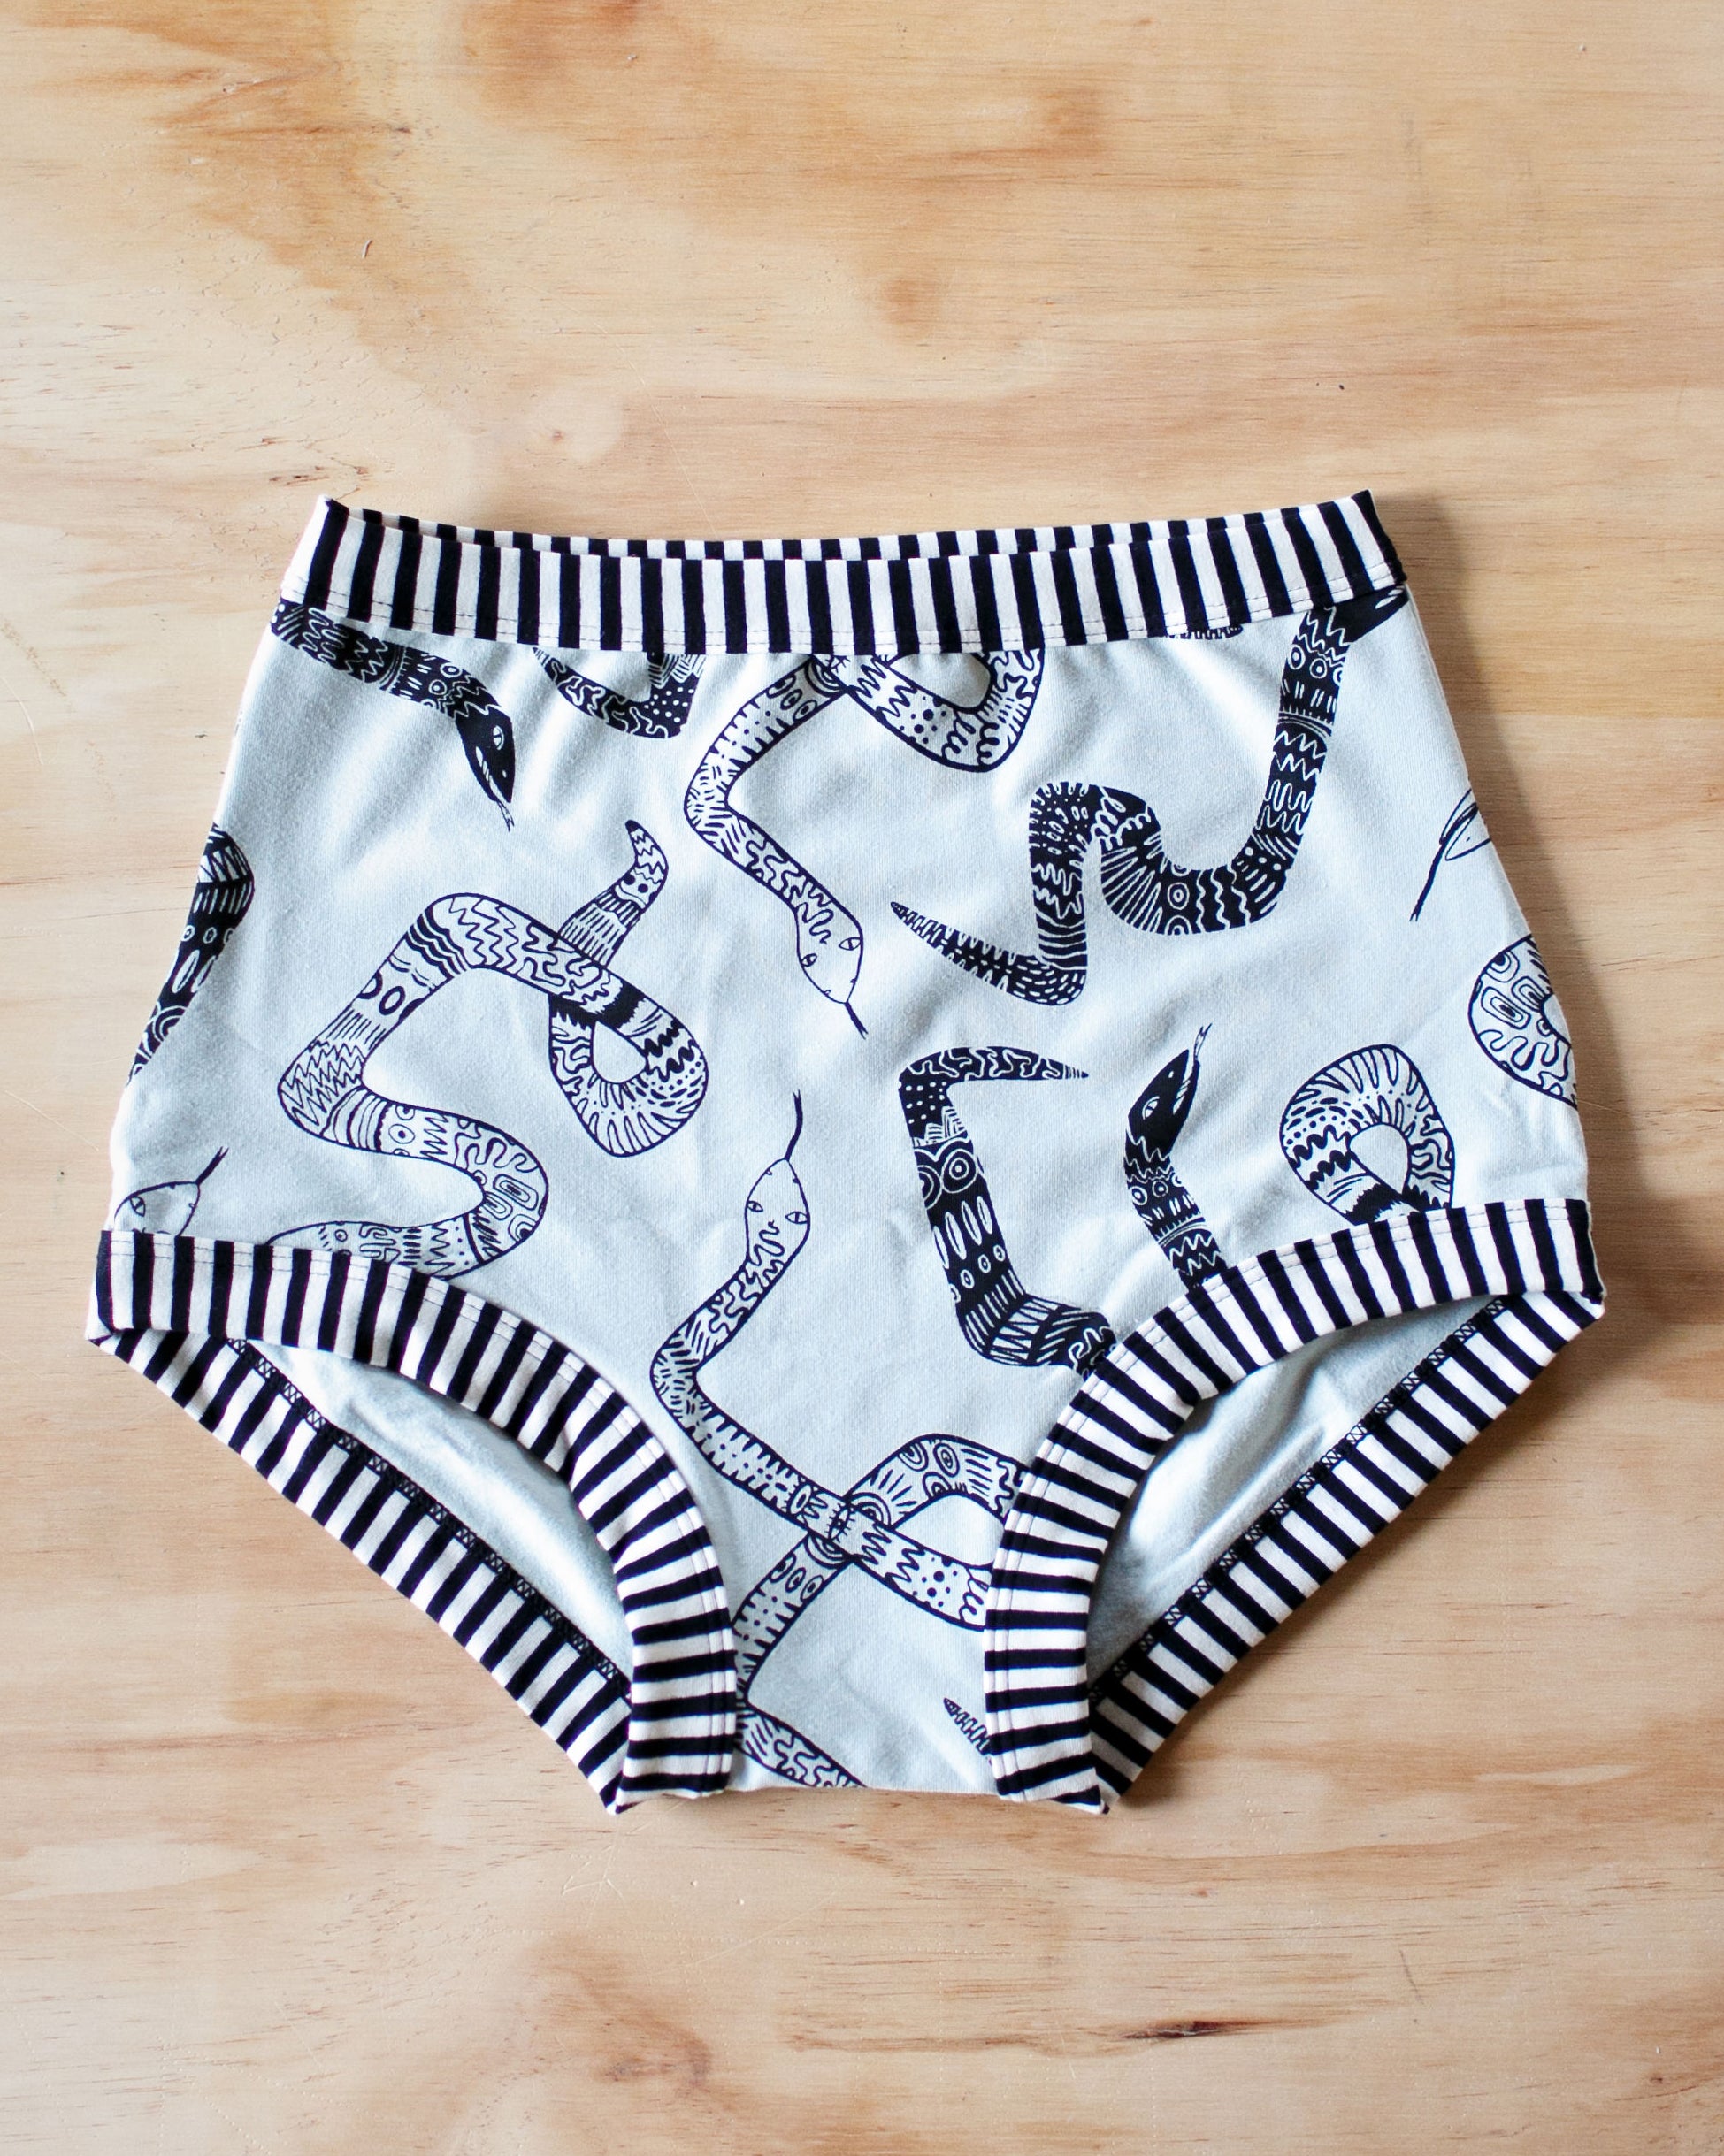 Flat lay of Thunderpants organic cotton Sky Rise style underwear in Sketchy Snakes: sage color with black sketched snakes and black and white stripe binding.